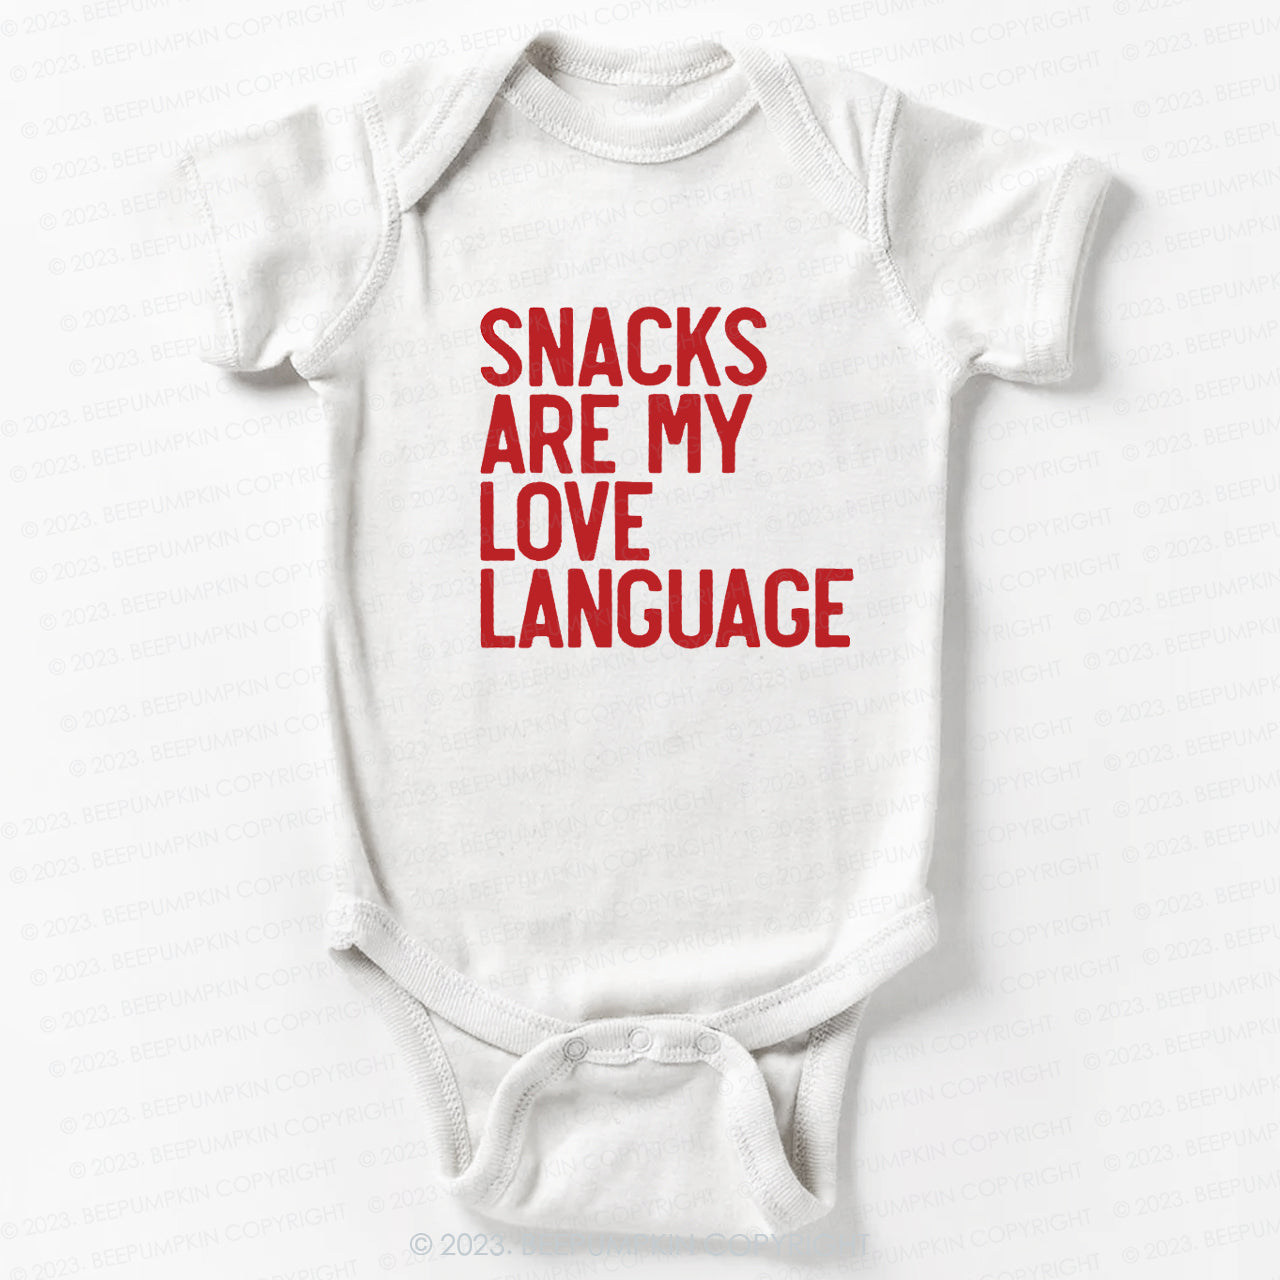 Snacks Are My Love Language Bodysuit For Baby